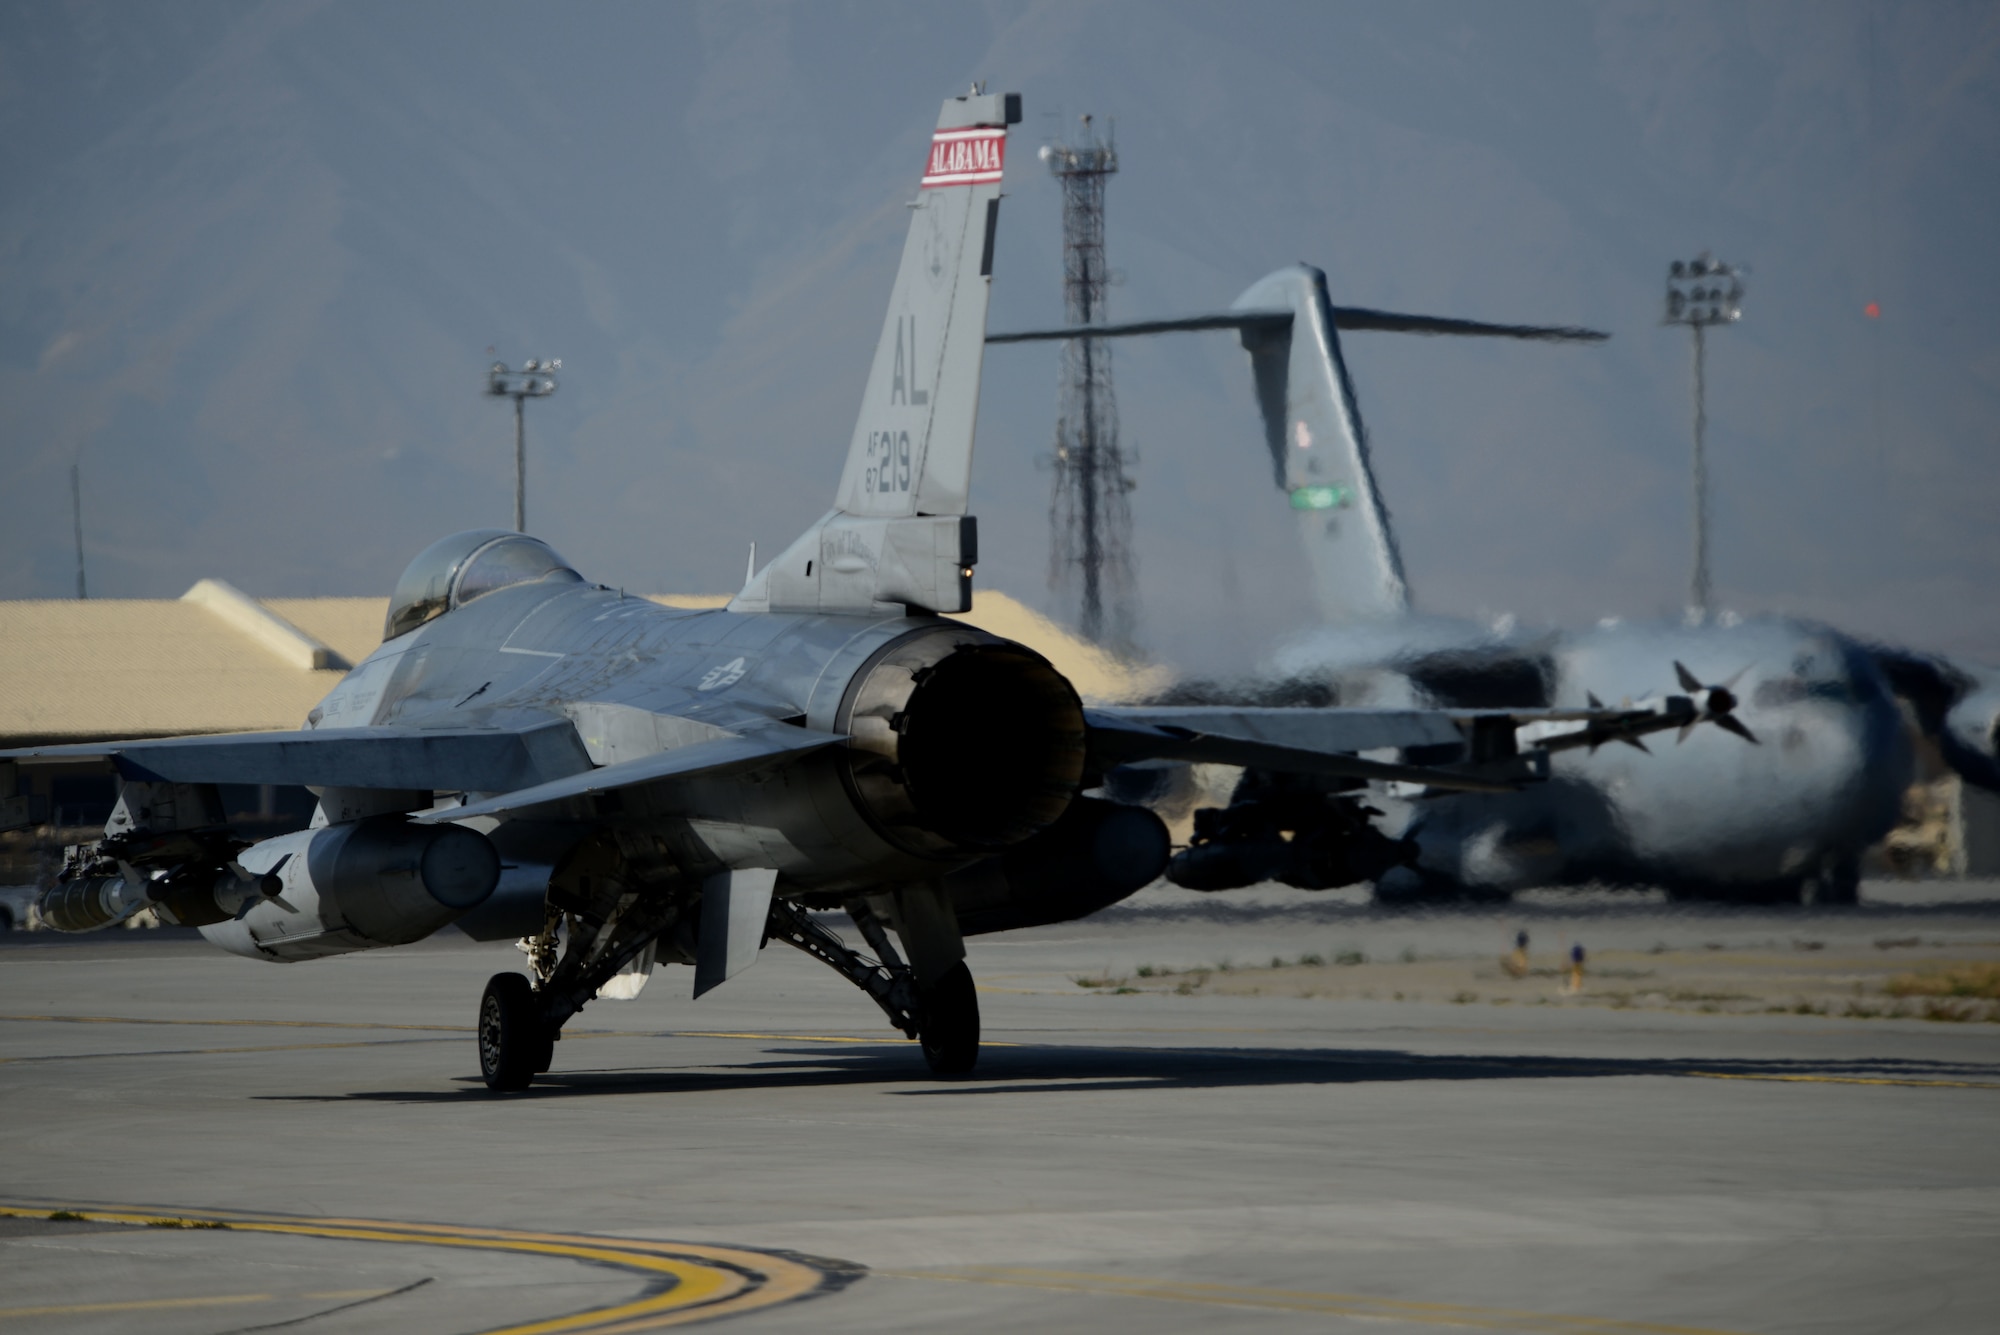 A U.S. Air Force F-16C Fighting Falcon prepares for take off at Bagram Airfield, Afghanistan Oct. 24, 2014.  Deployed service members help operate 46 different types of aircraft in-and-out of the buisiest single runway airfield in the Department of Defense. (U.S. Air Force photo by Staff Sgt. Evelyn Chavez/Released)